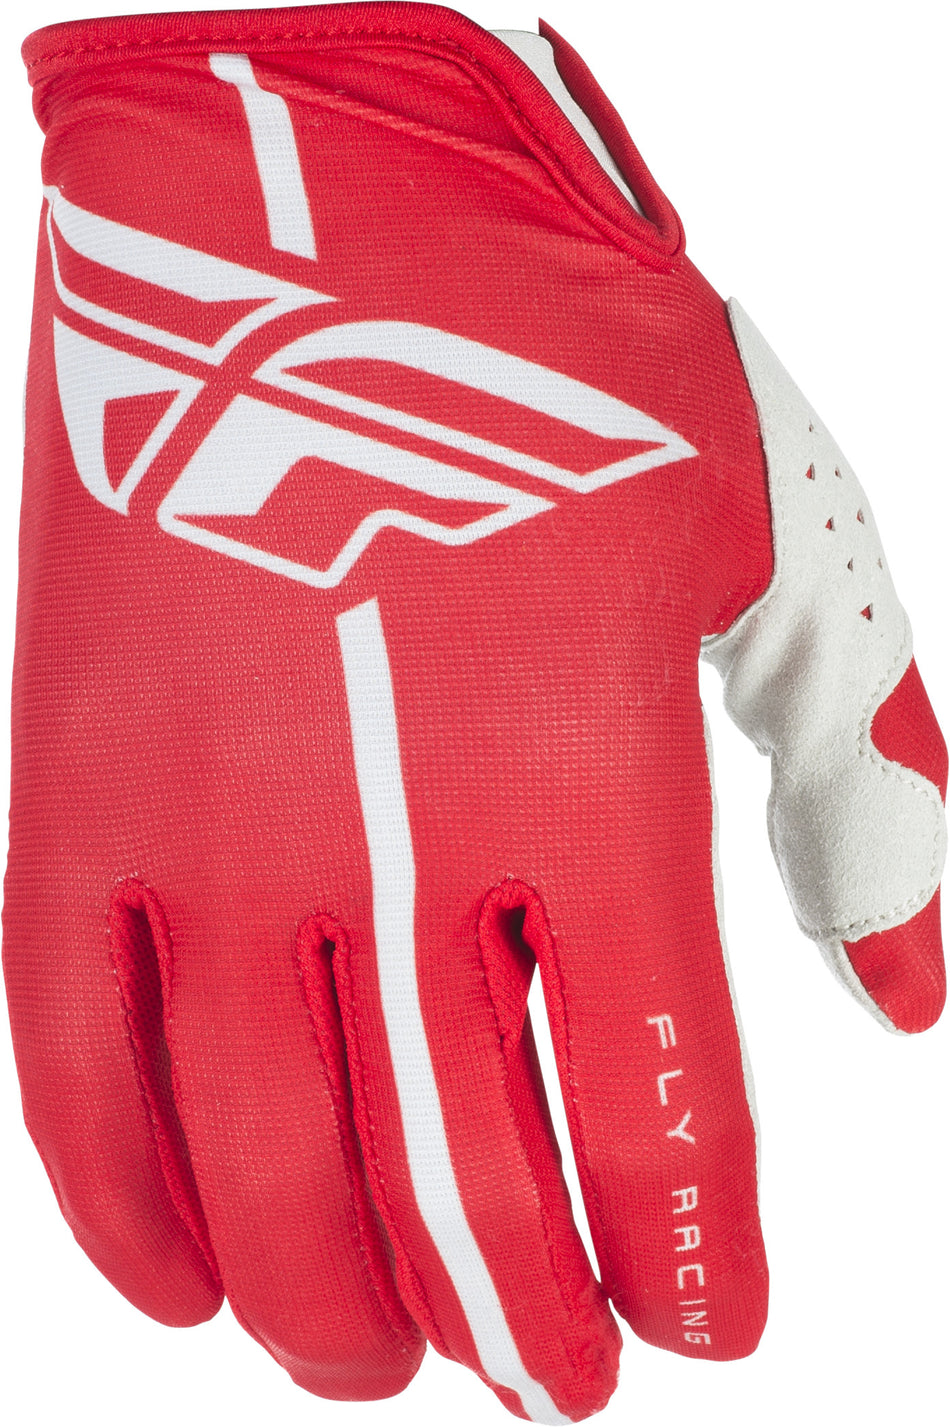 FLY RACING Lite Gloves Red/Grey Sz 4 371-01204